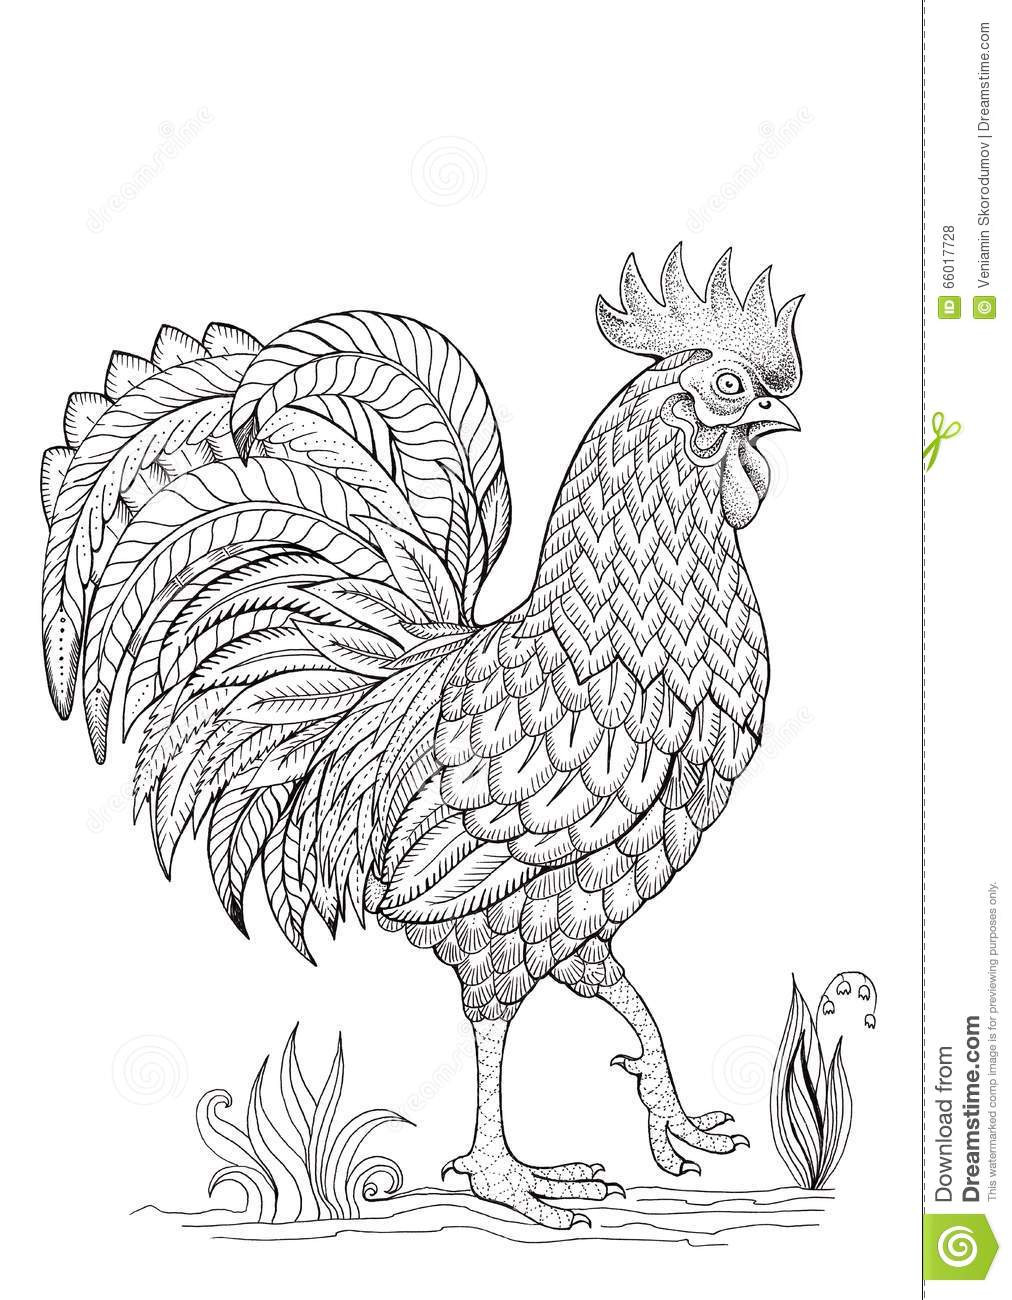 Chicken Coloring Pages For Adults
 Coloring cock rooster stock illustration Illustration of